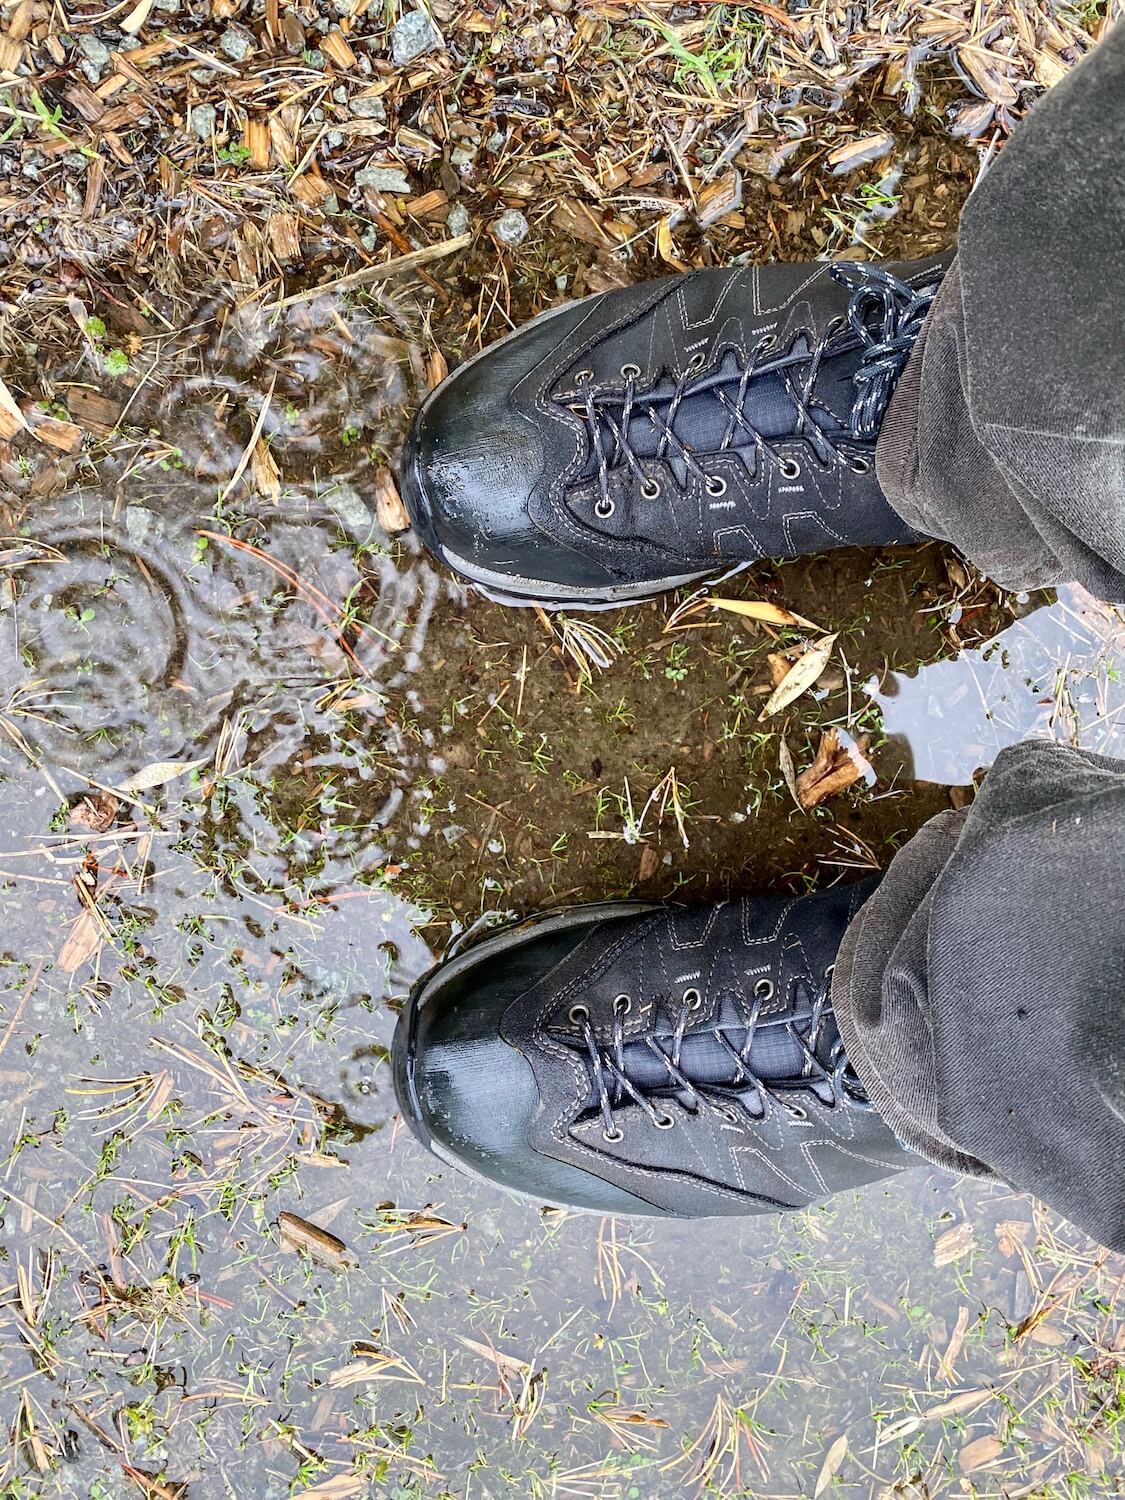 Gray hiking shoes look very wet, as well as the cotton pants that seemed soaked with water.  This person is standing in a mud puddle with droplets falling and making circle of ripples.  There are assorted wood chips and other plant matter floating in the water.  